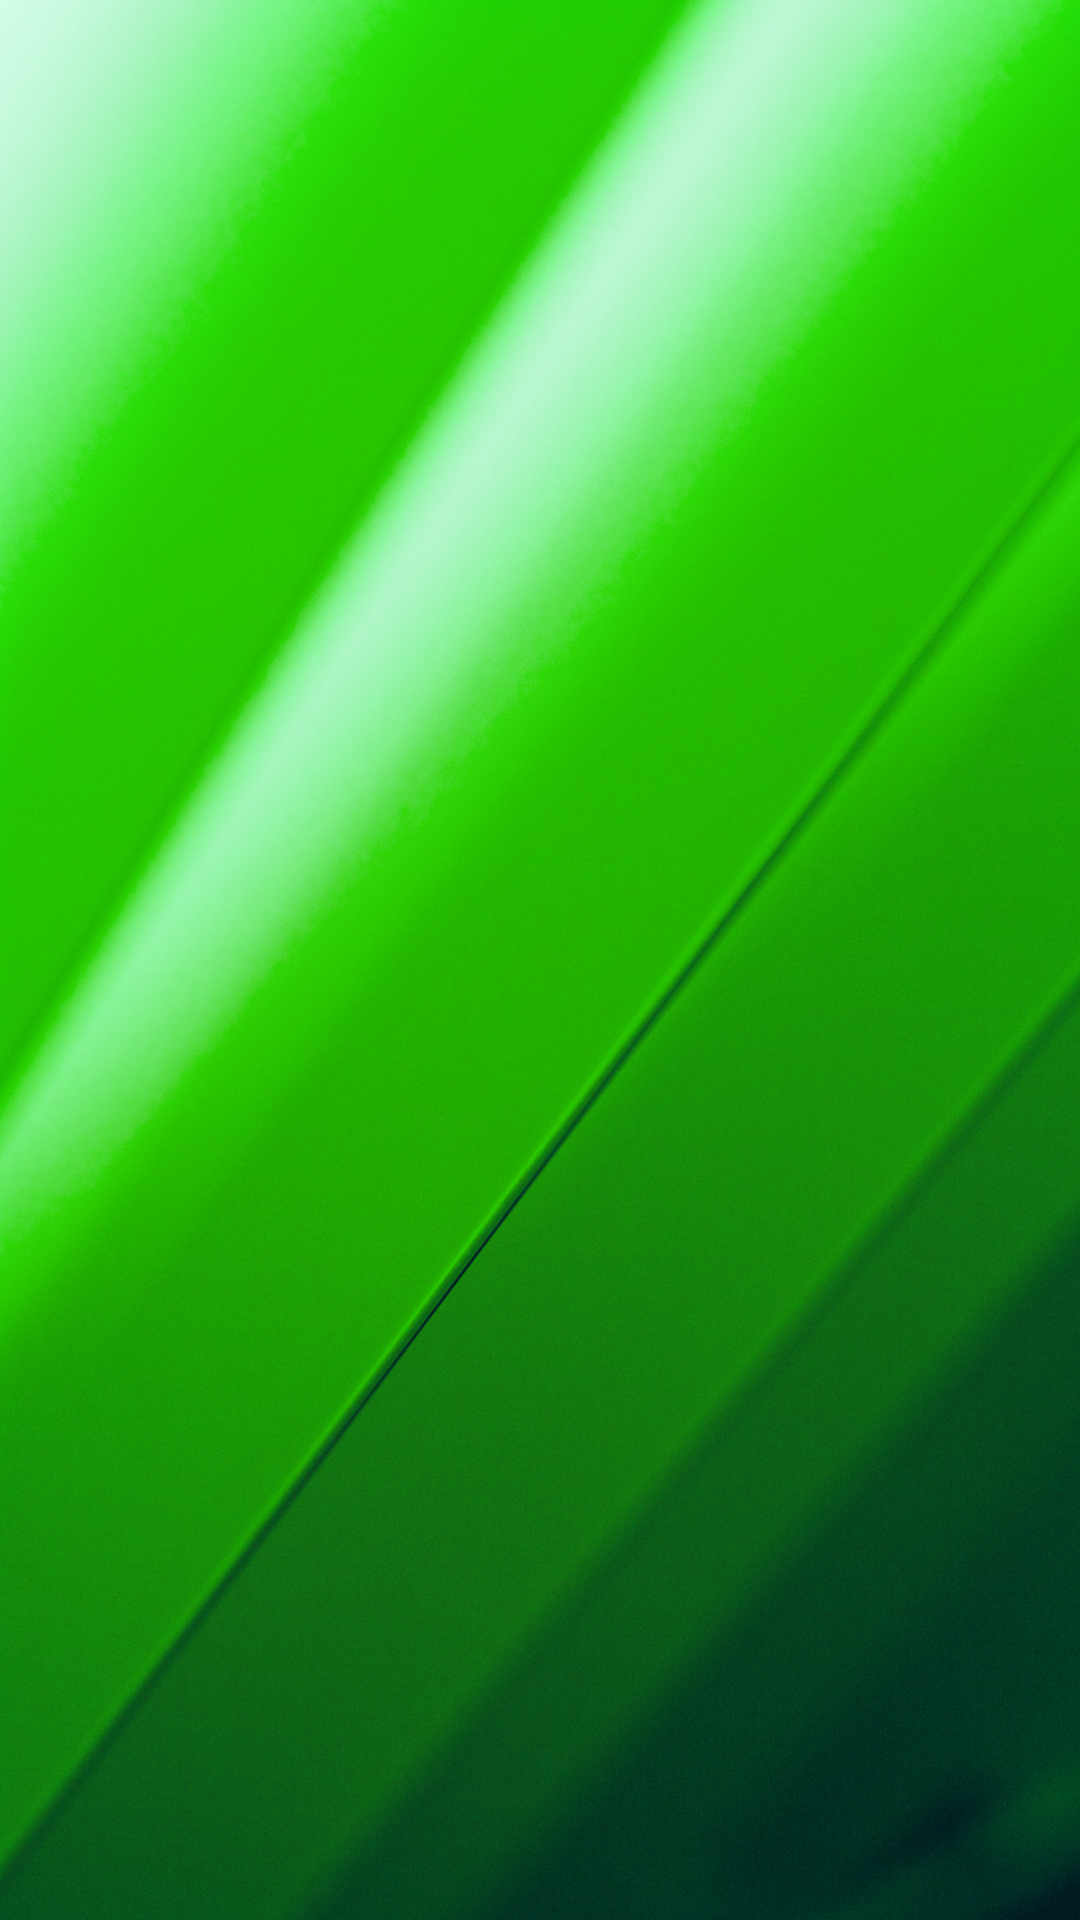 Green qhd samsung galaxy s6, s7, edge, note, lg g4 wallpapers hd, desktop  backgrounds 1440x2560, images and pictures